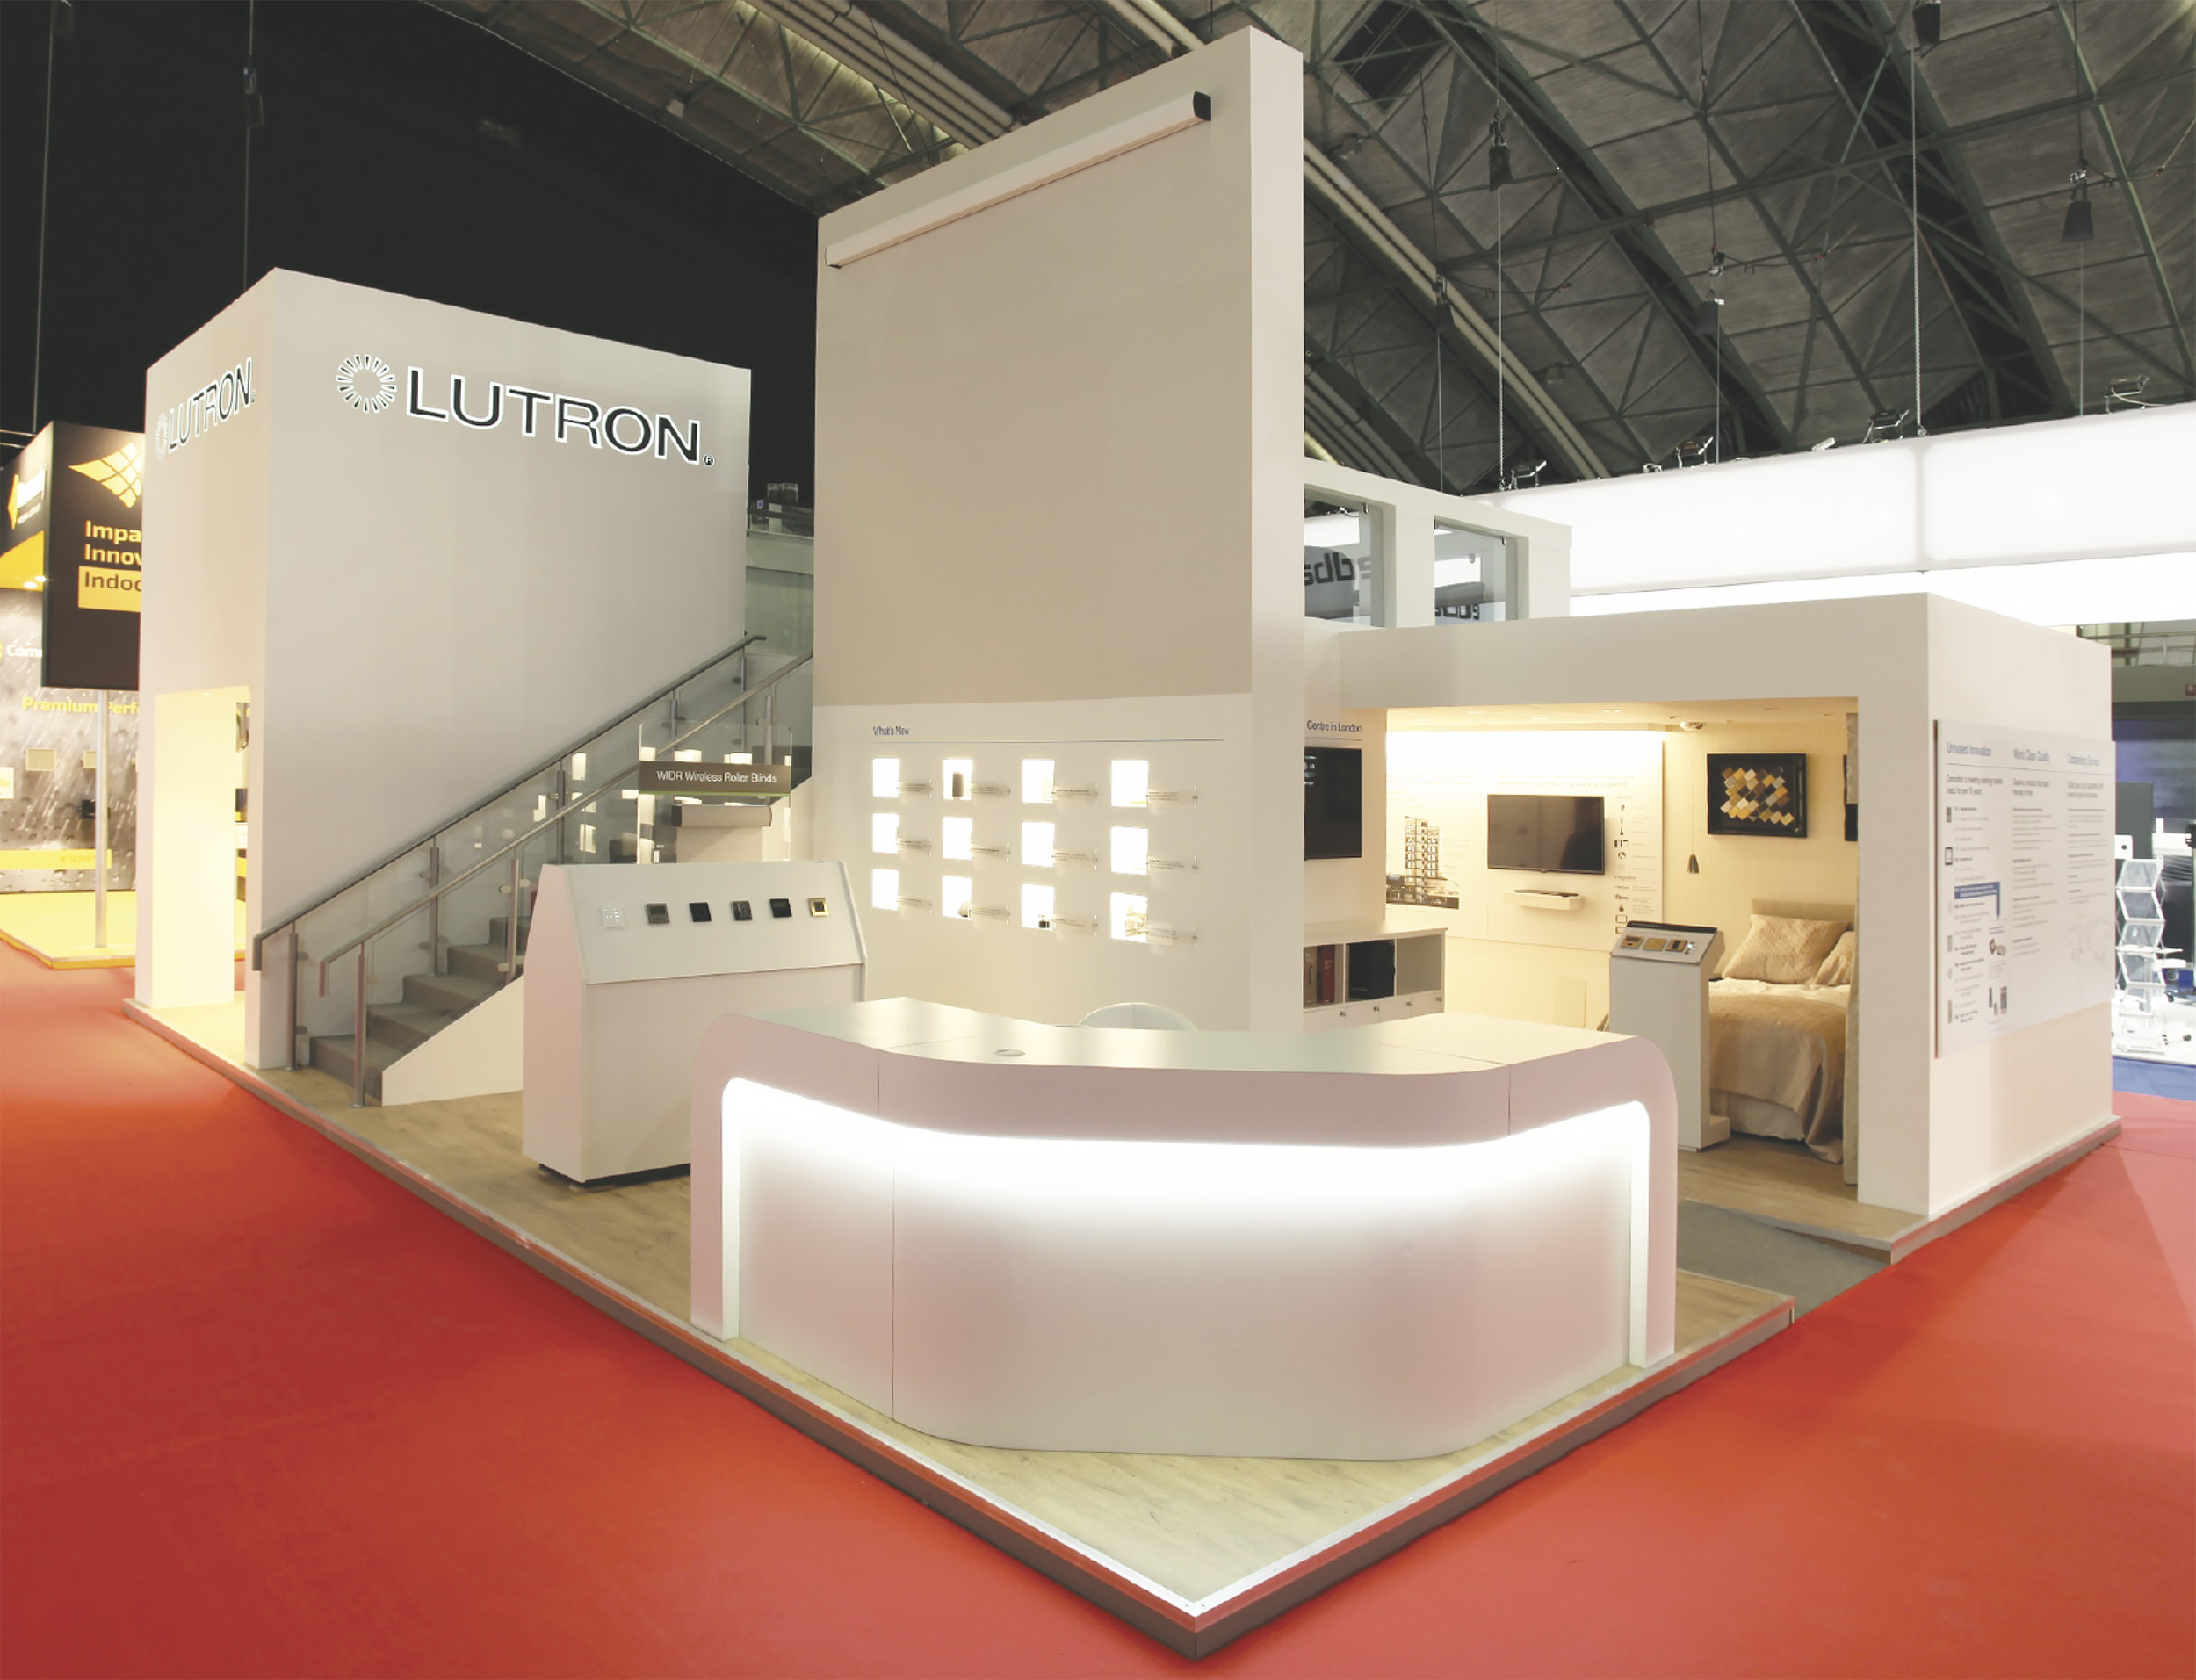 Lutron exhibition stand